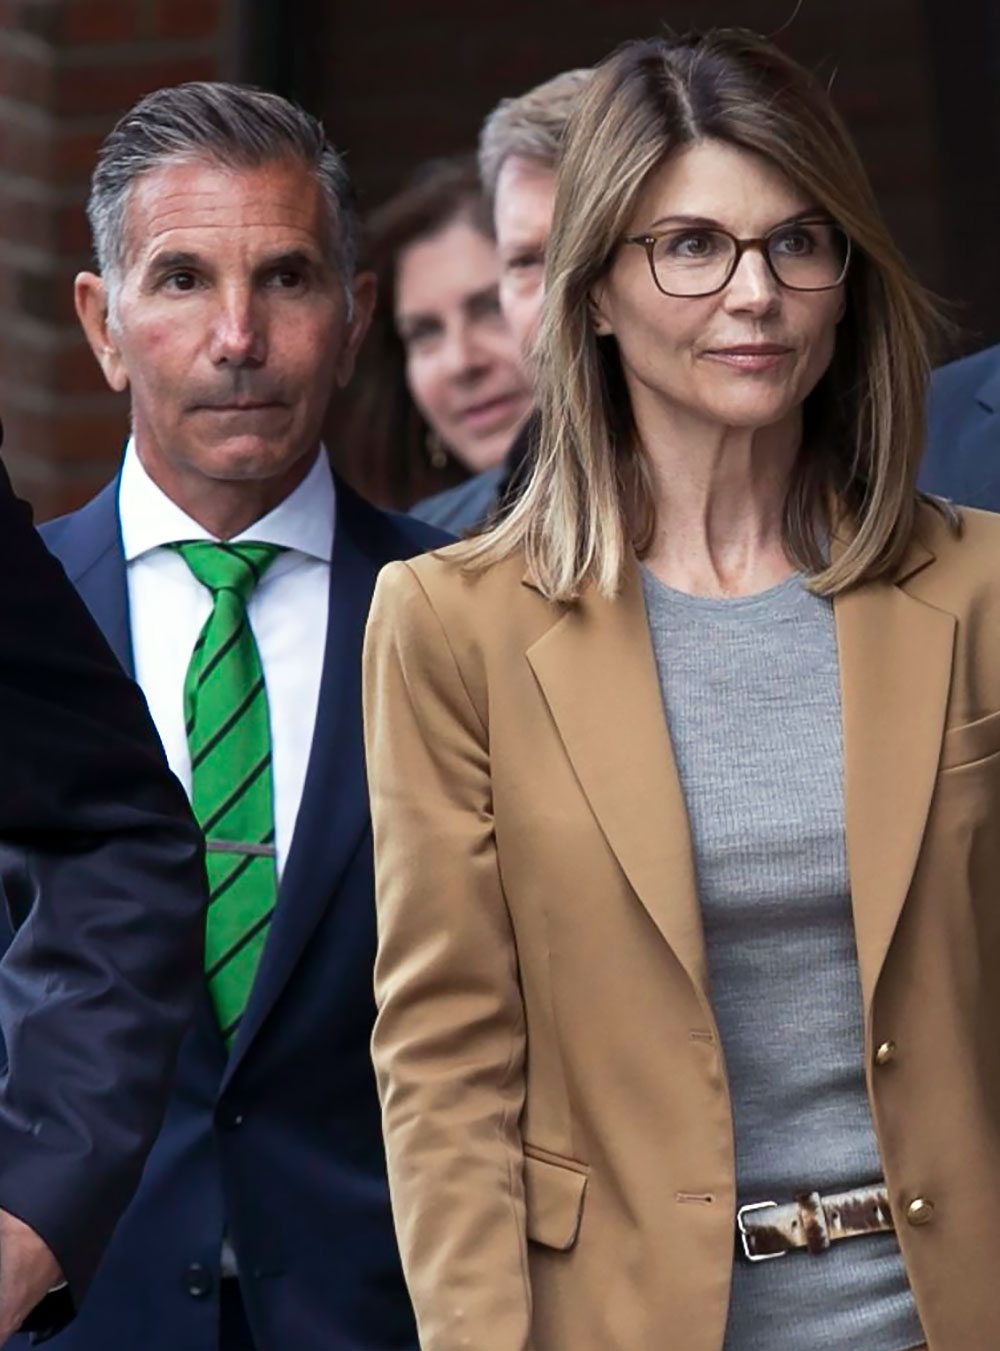 When Are Lori Loughlin, Mossimo Expected to Be Released From Prison?